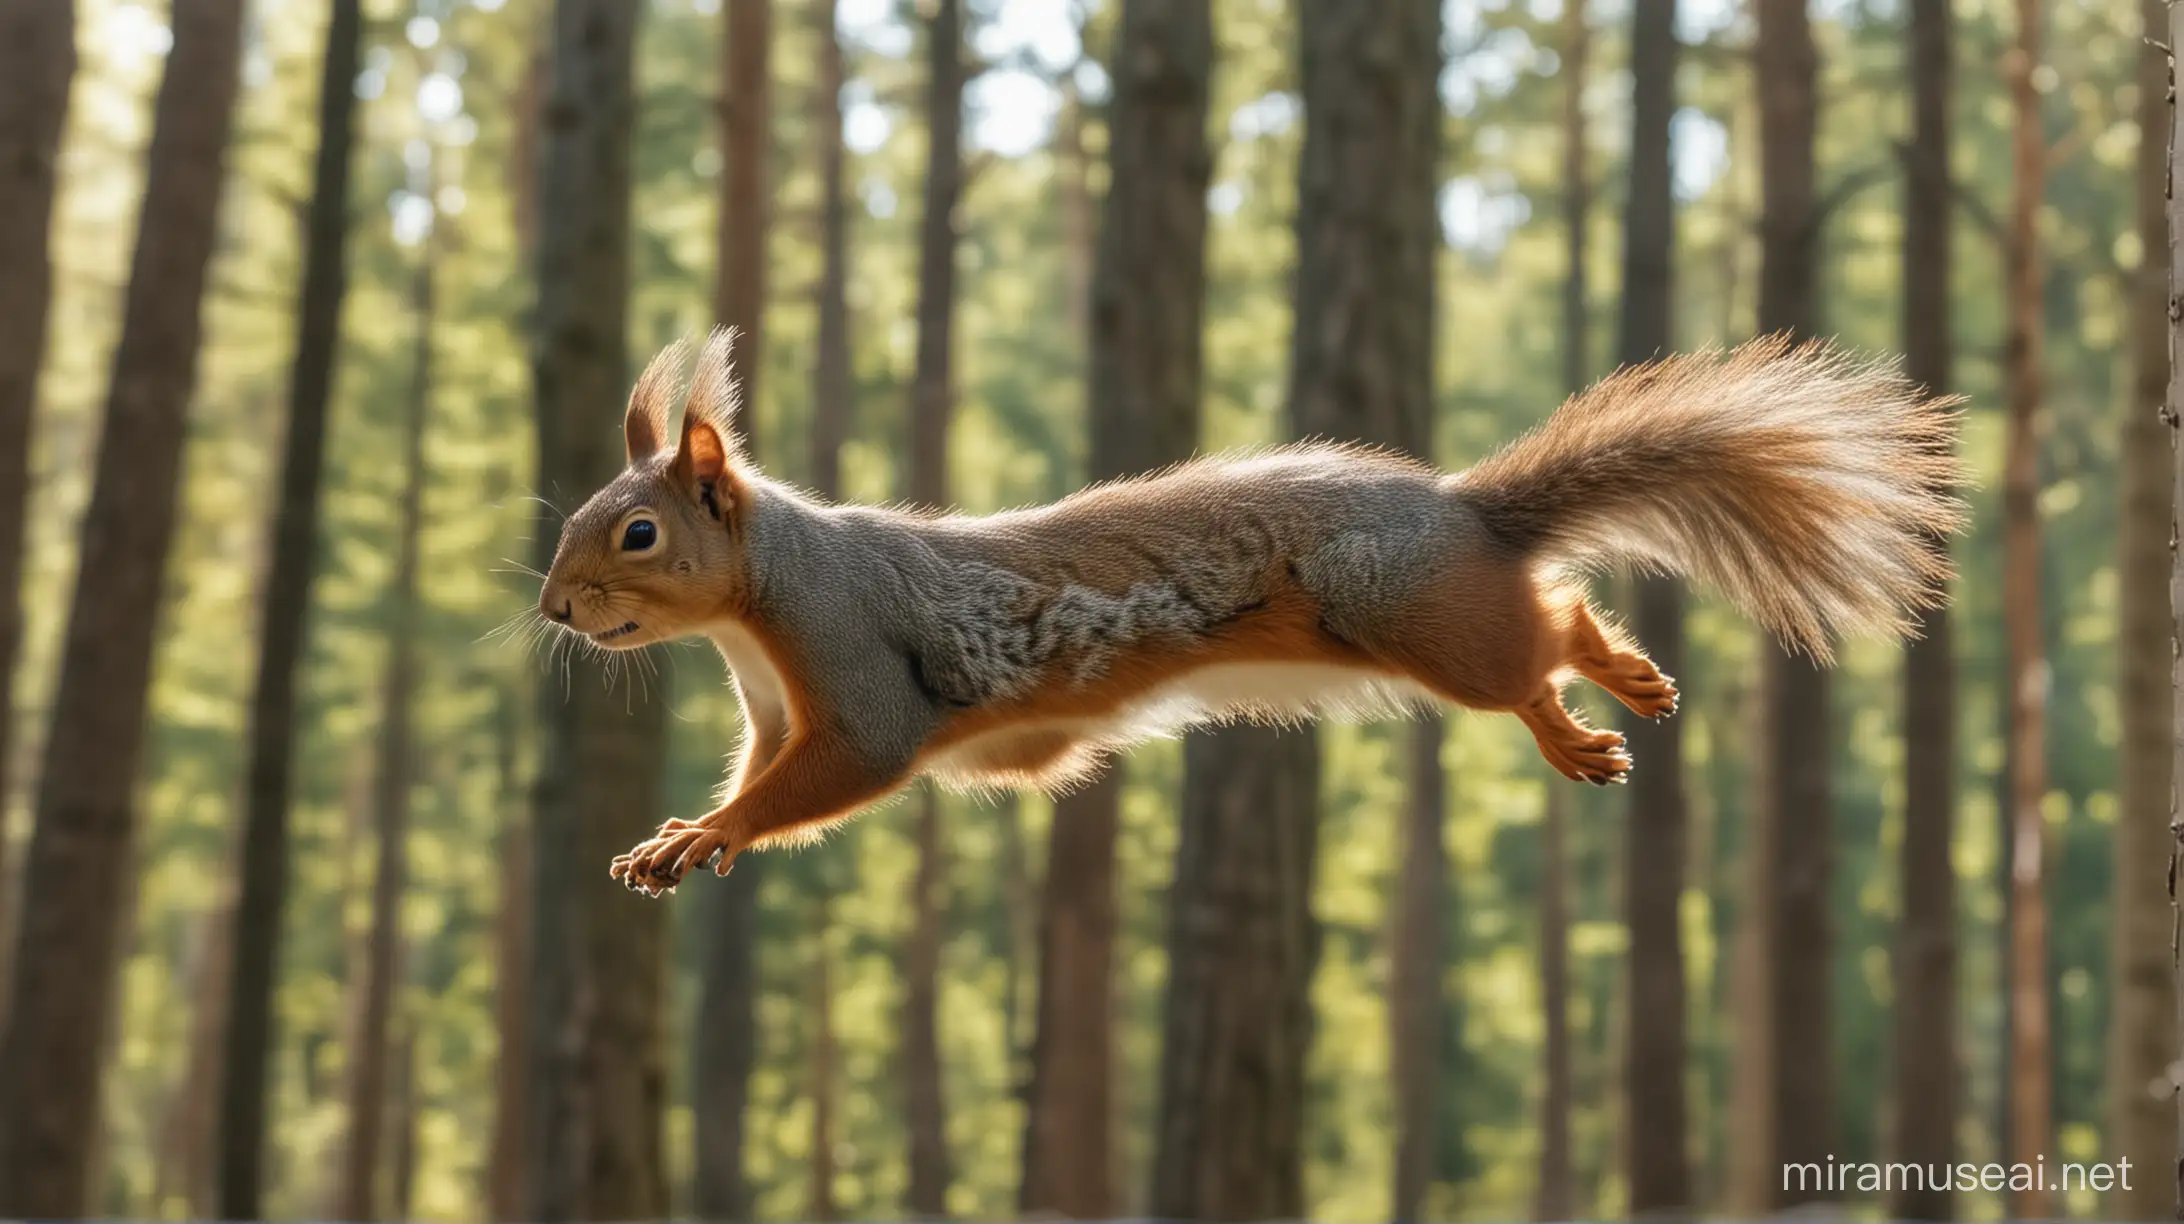 squirrel flying through the trees sunny day forest